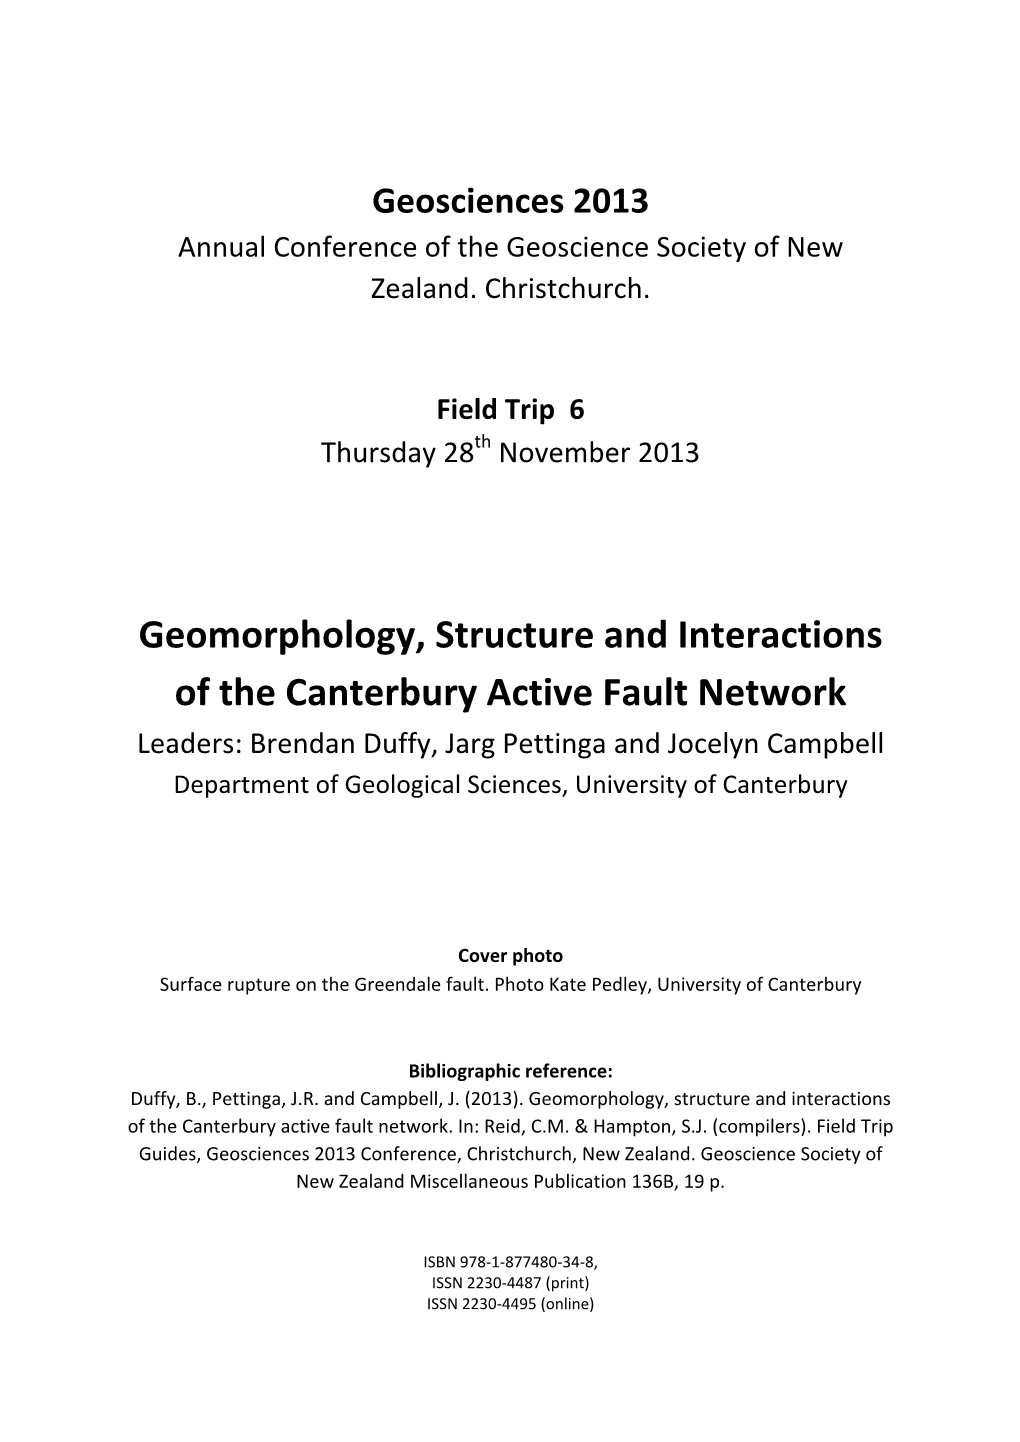 Geomorphology, Structure and Interactions of the Canterbury Active Fault Network